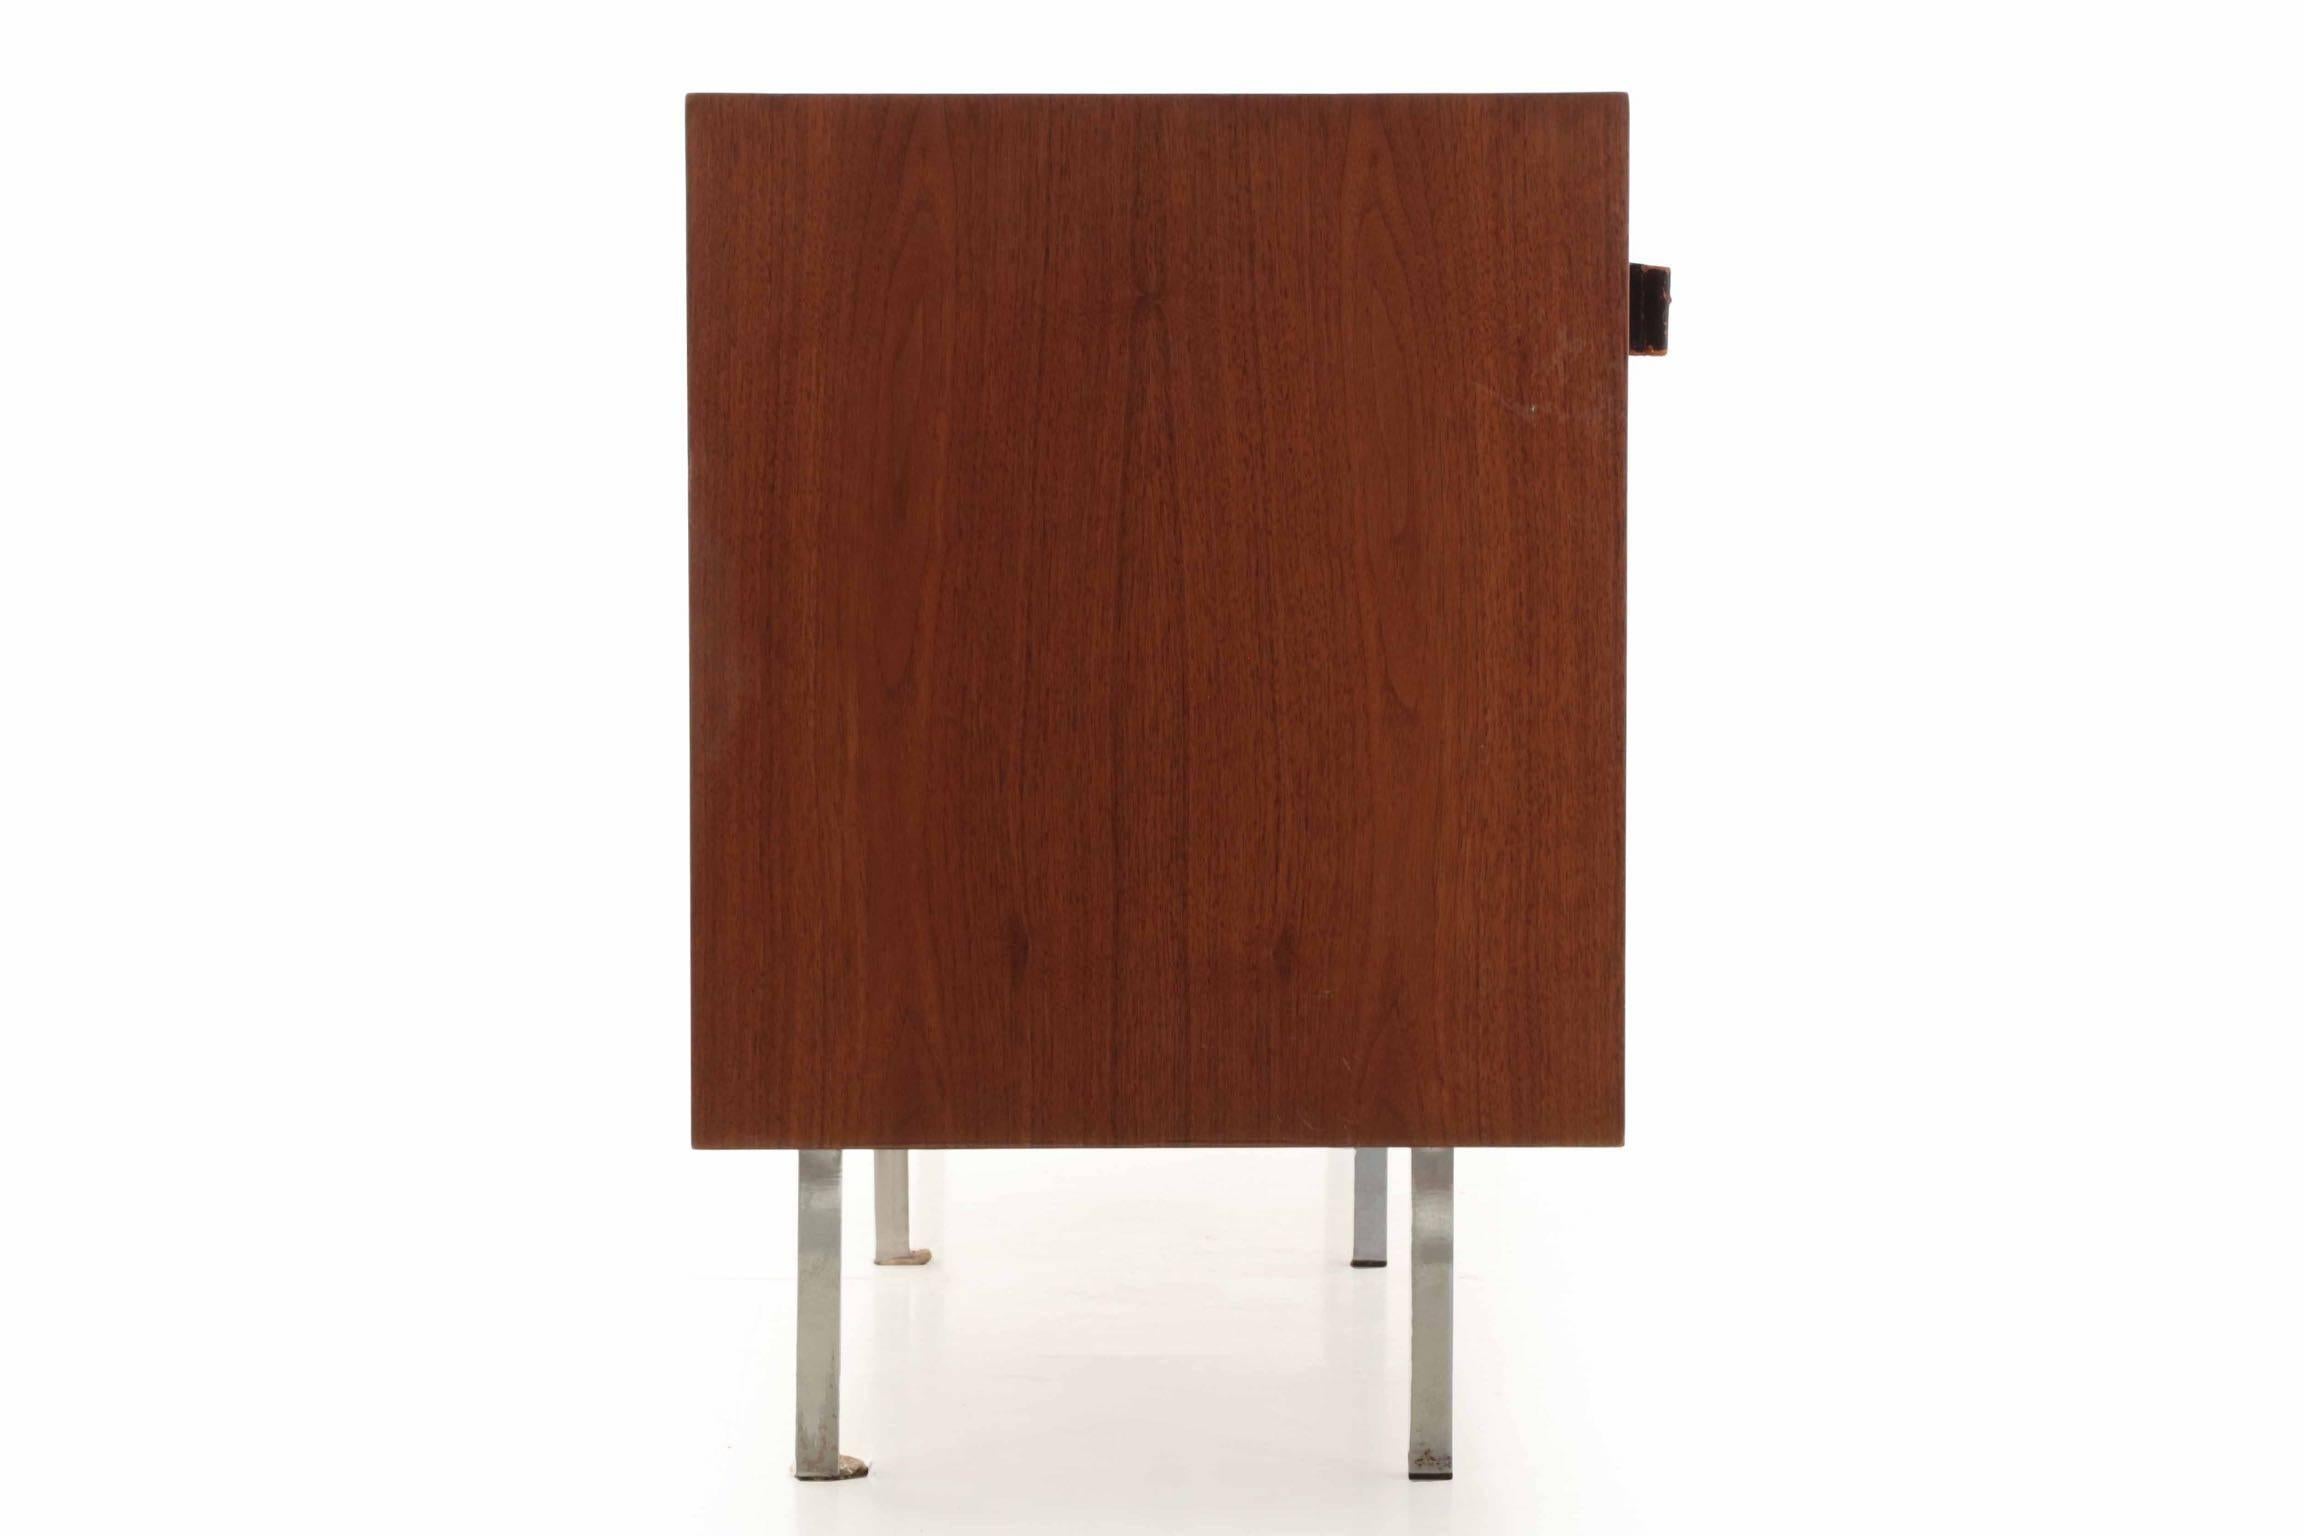 Veneer Florence Knoll Walnut and White Laminate Credenza Sideboard Cabinet, circa 1955